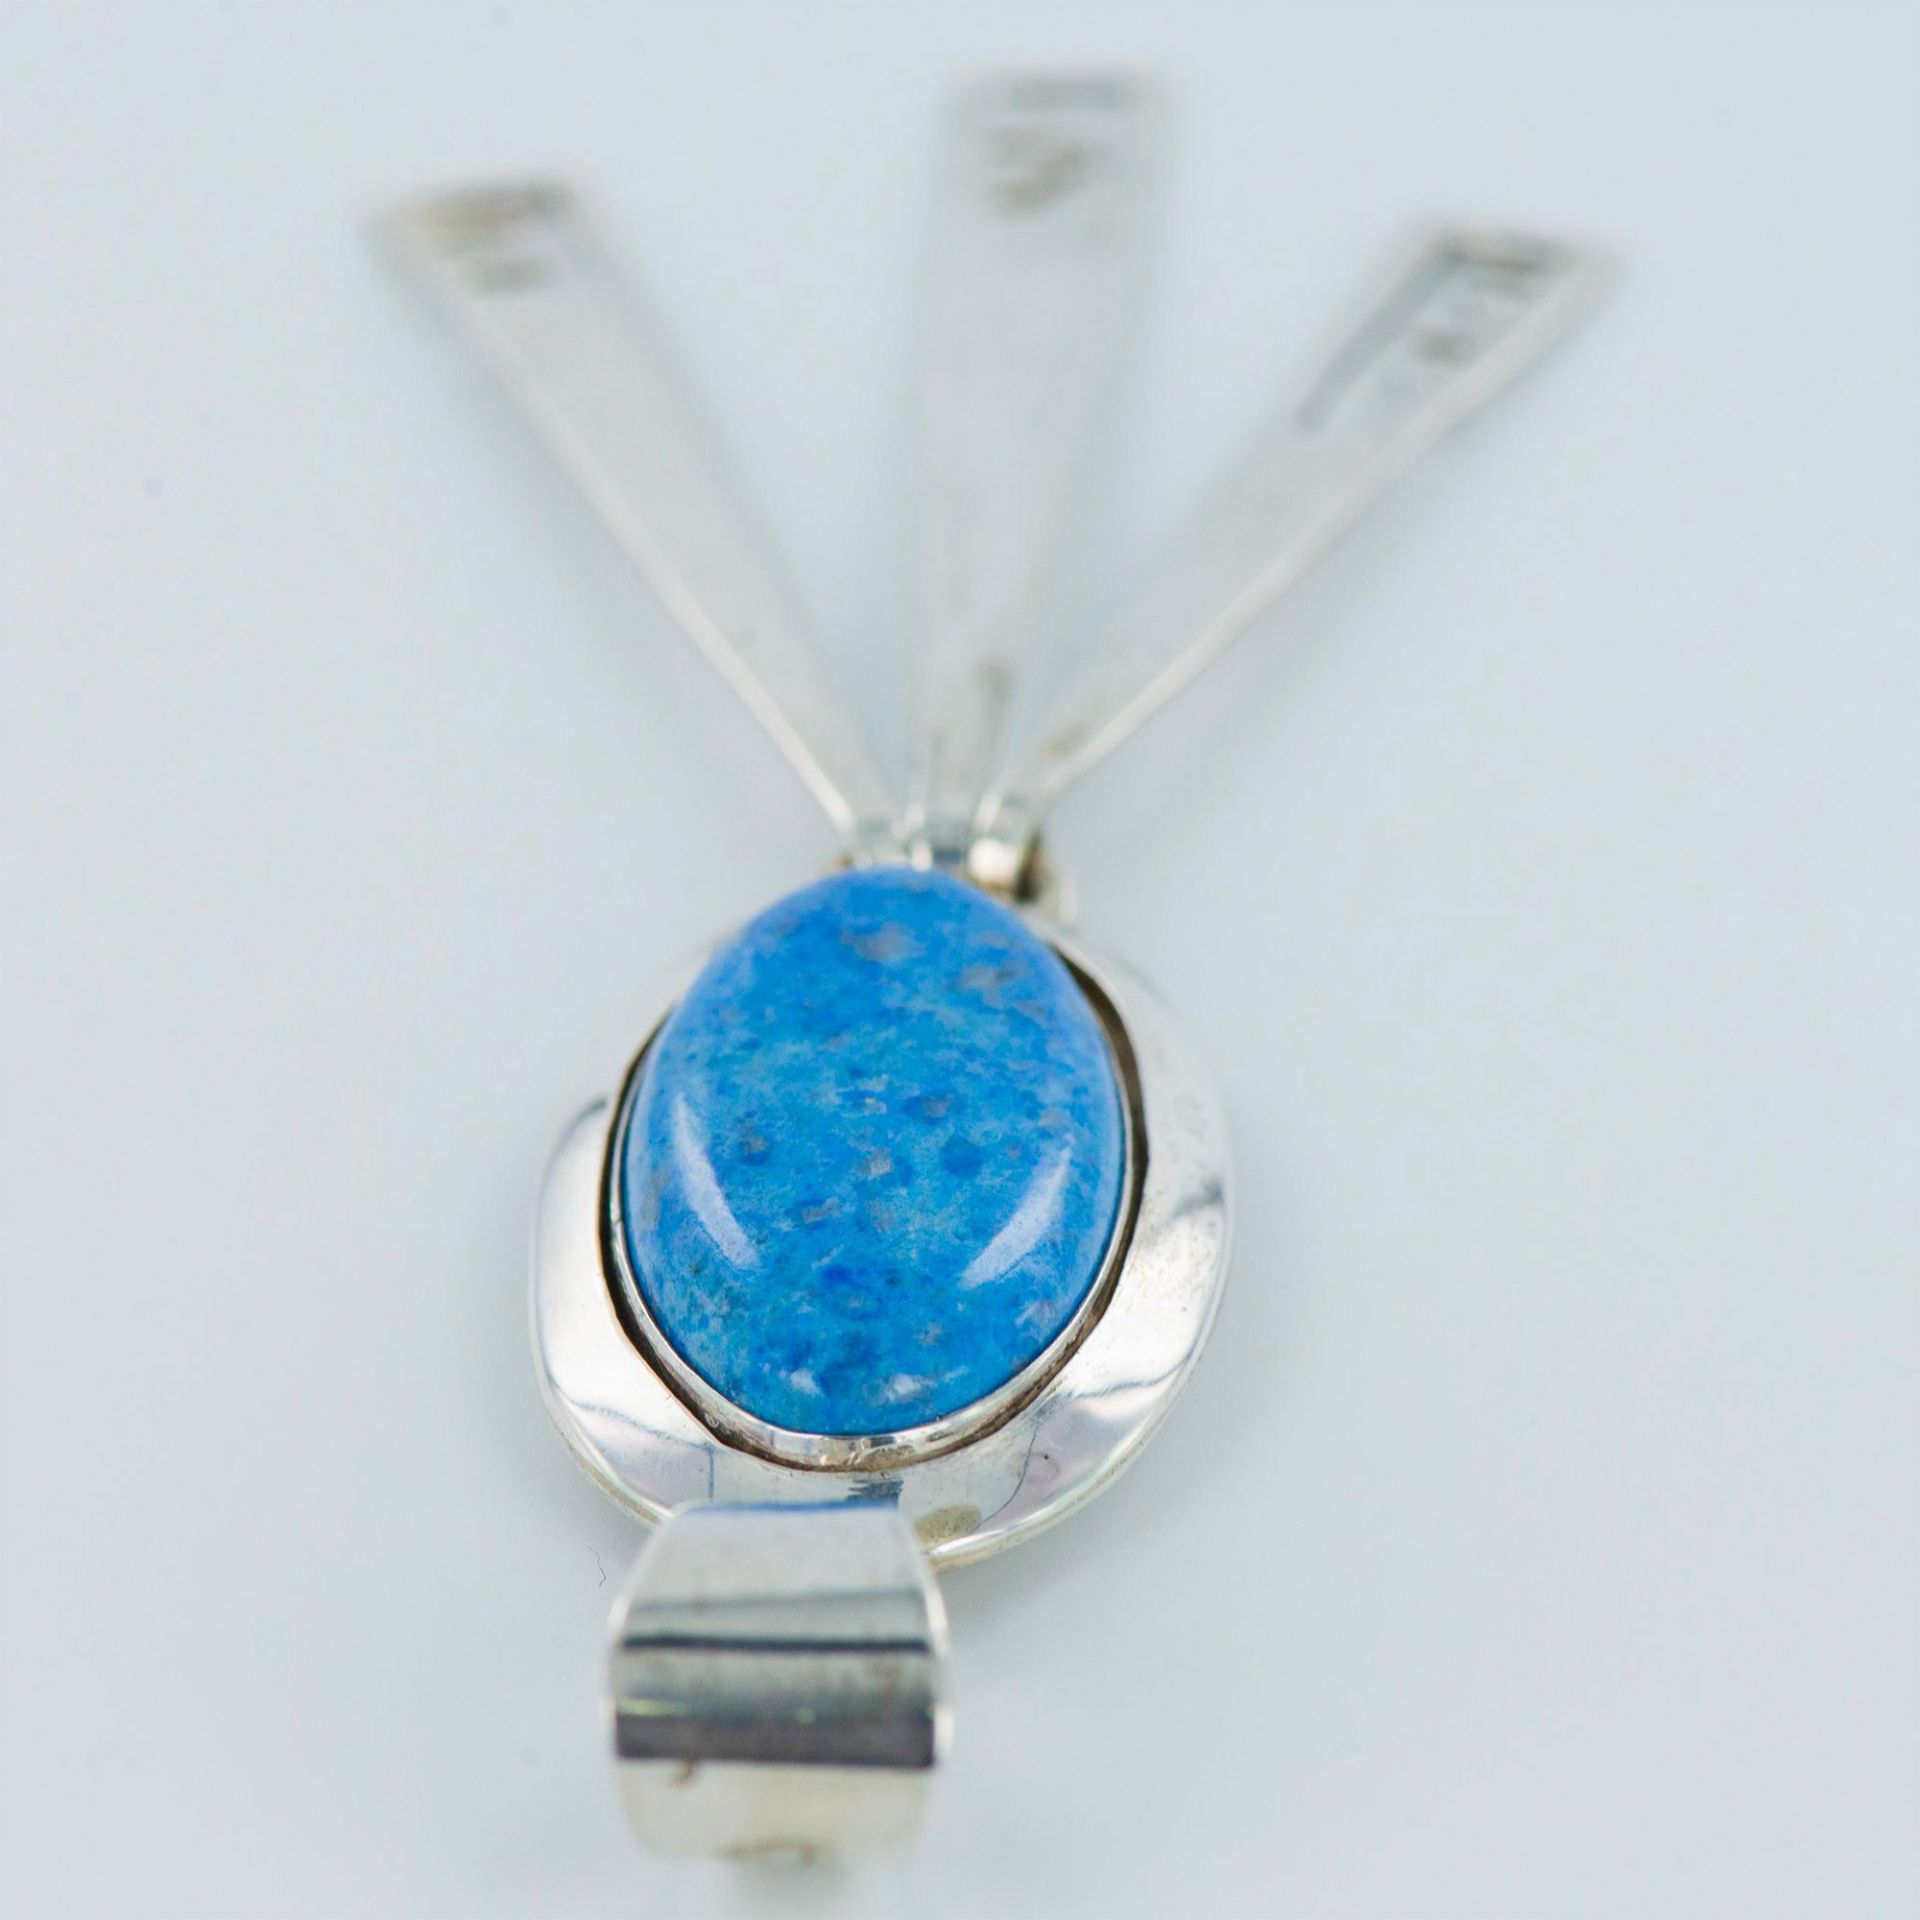 Jackson Sterling Silver and Turquoise Pendant - Image 3 of 5